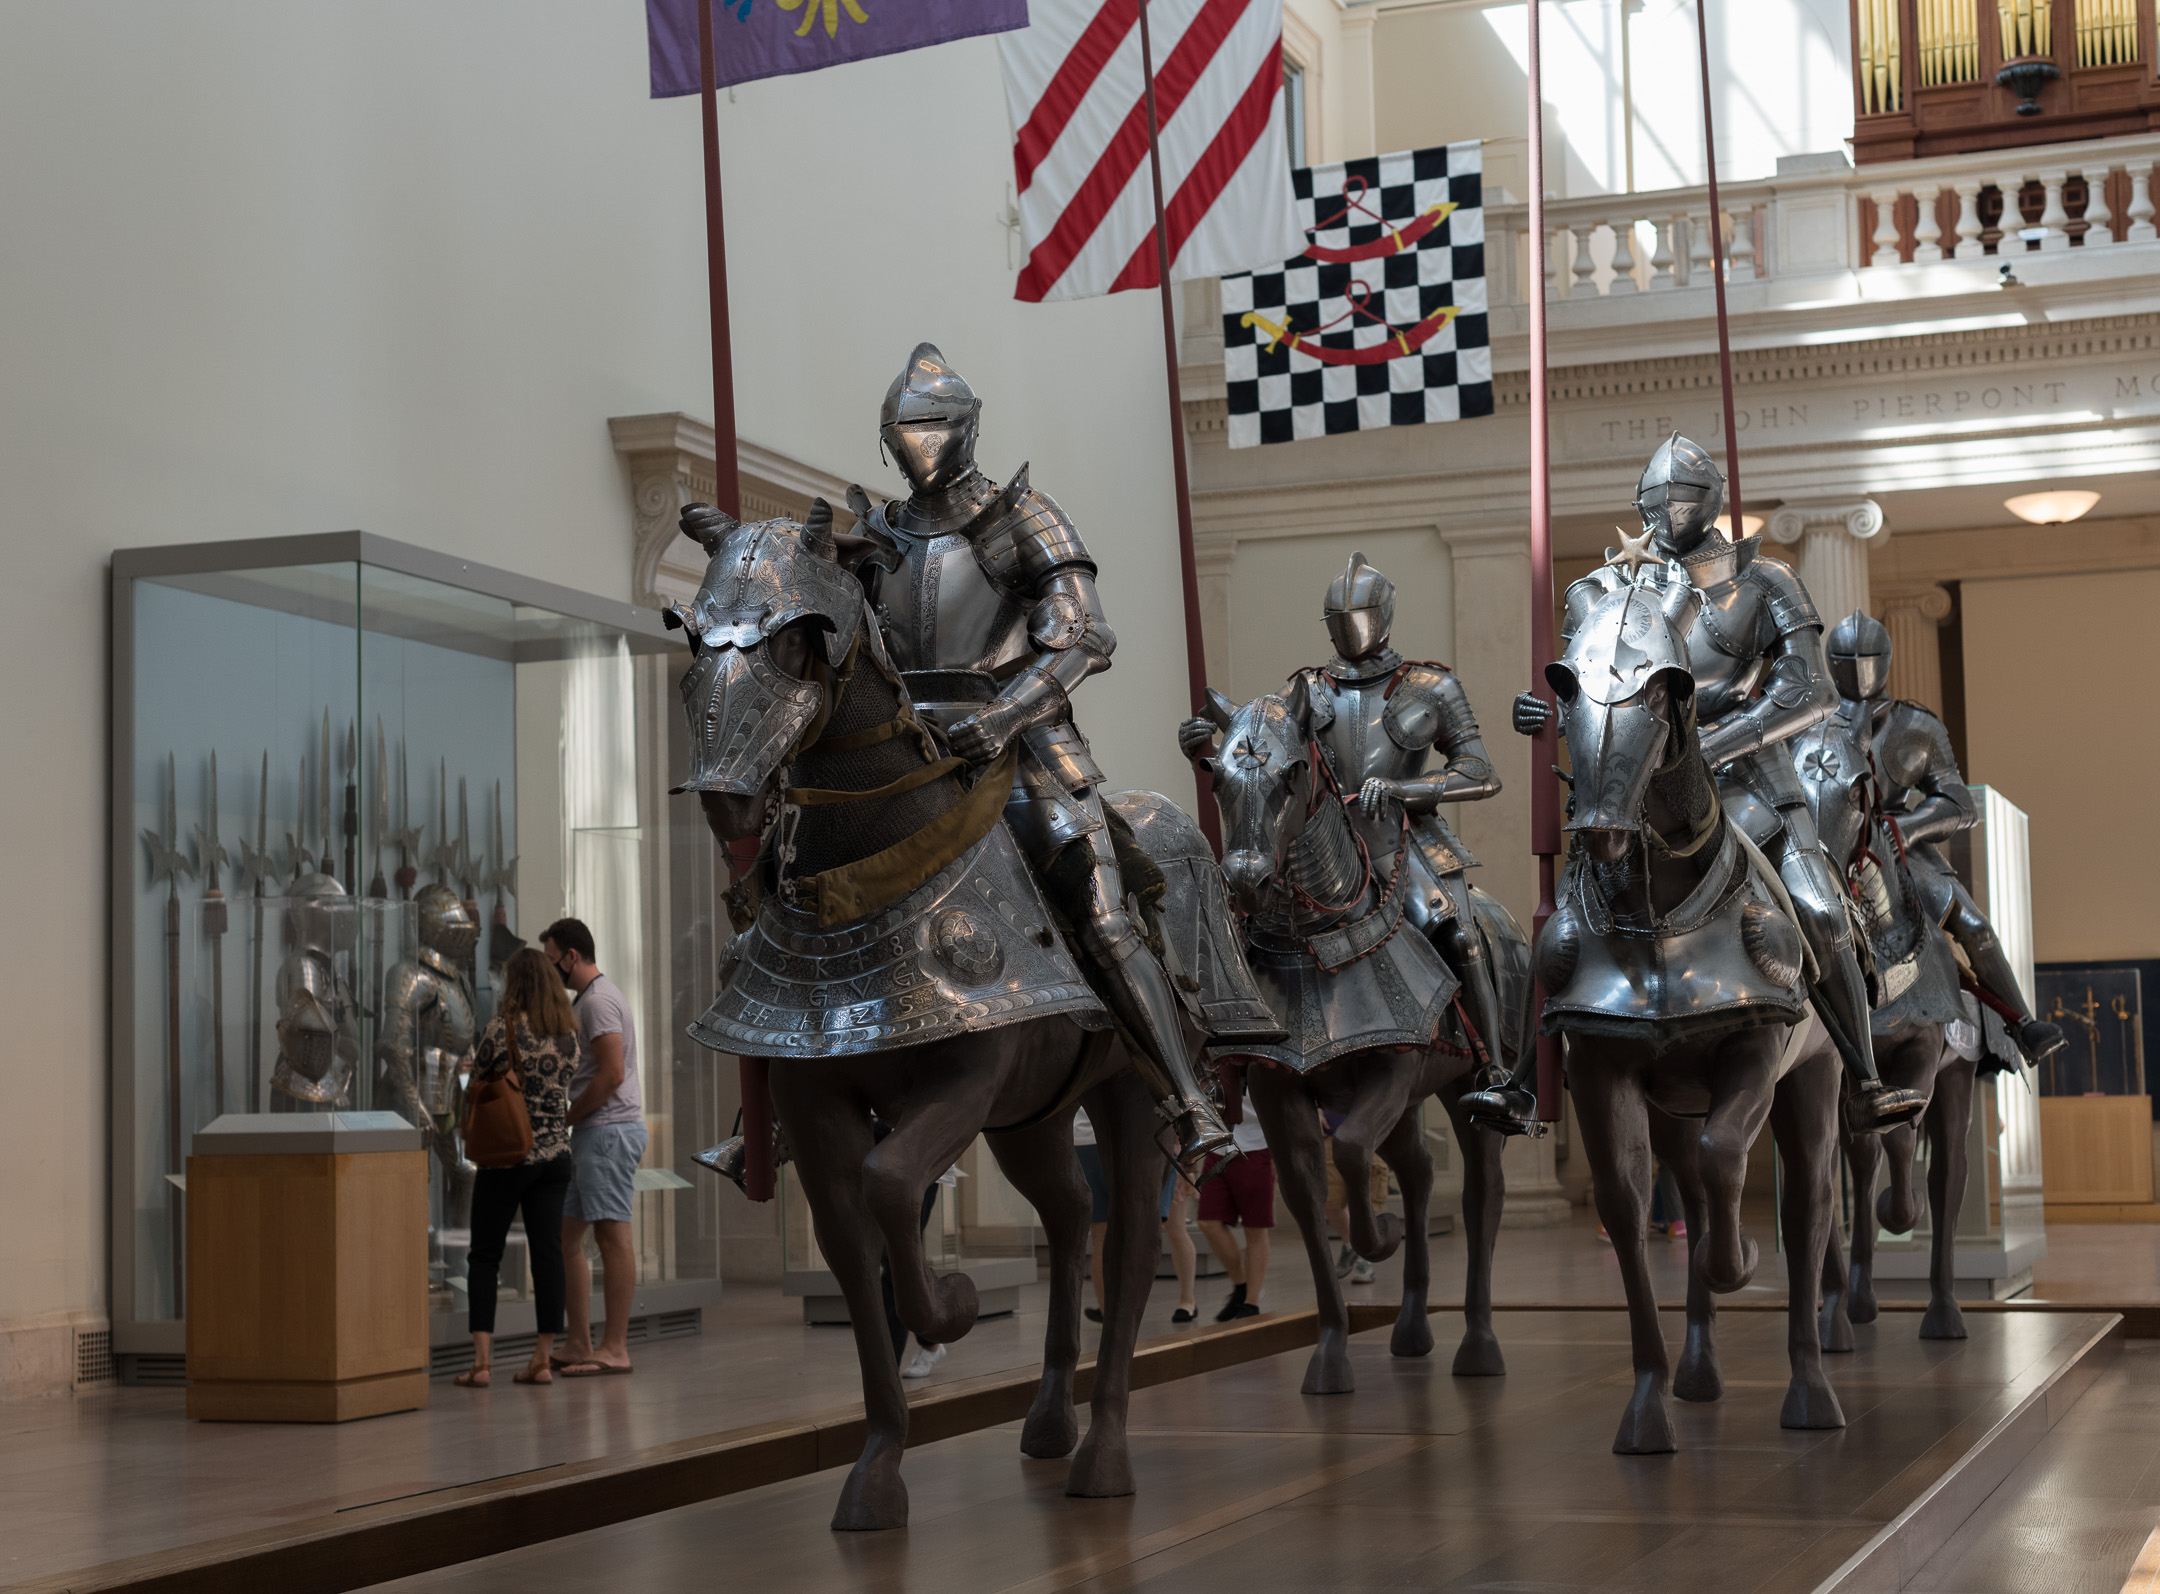 Visiting the Armory Exhibit is one of the top things to do at The Met.